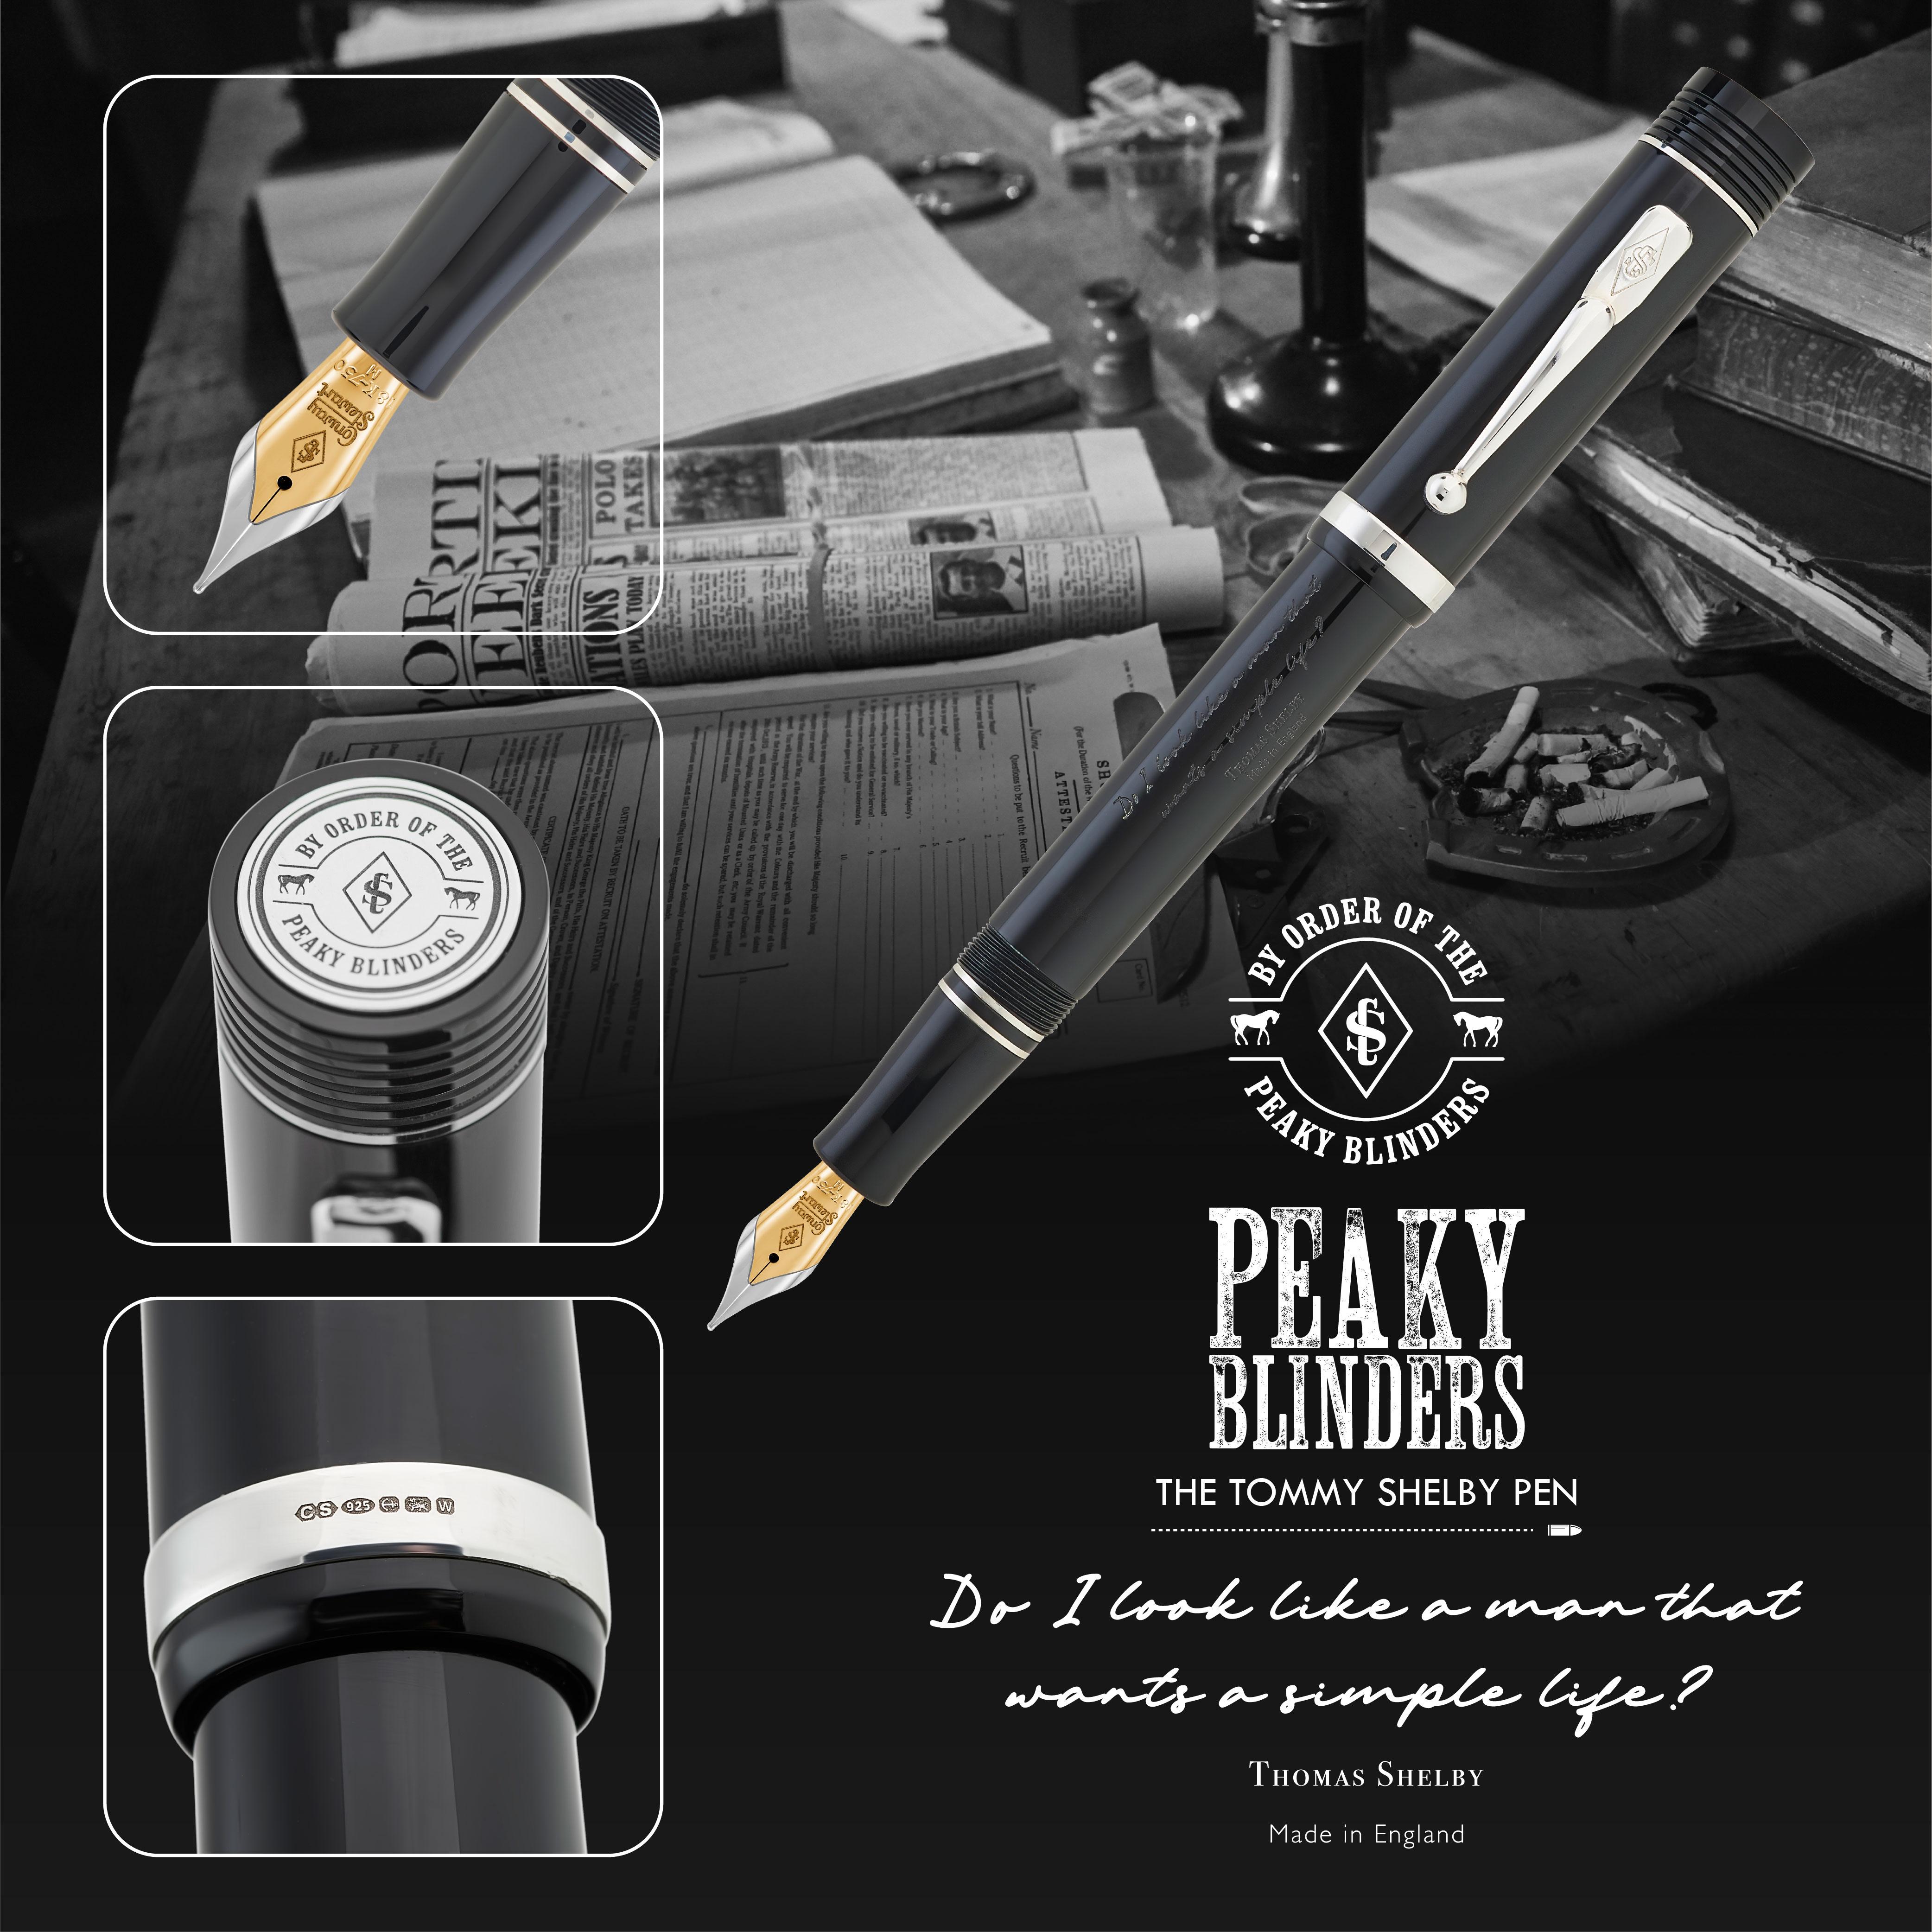 An image of the 'By Order of the Peaky Blinders' infographic, featured on a writing instrument by Conway Stewart